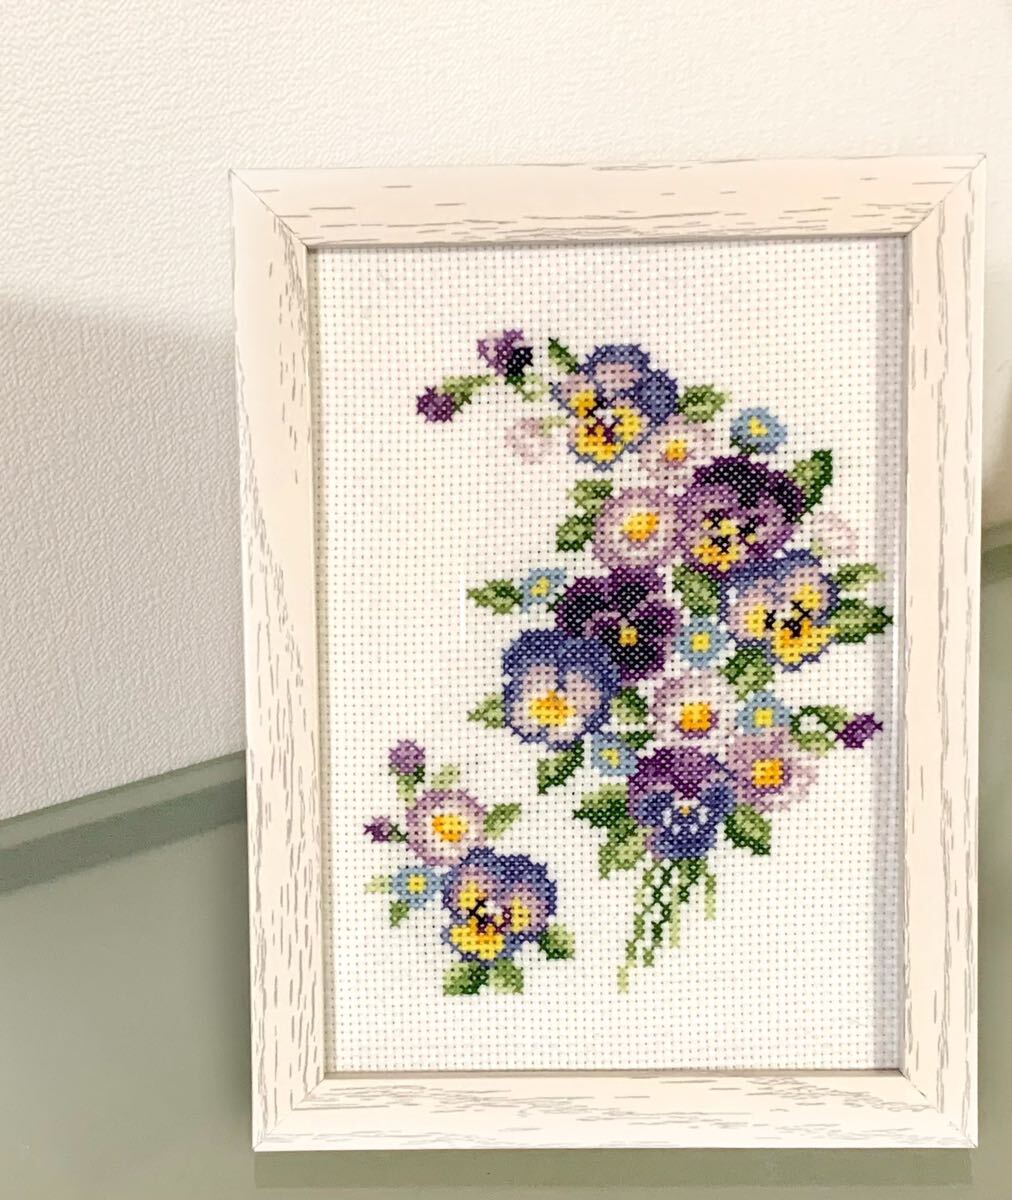  Cross stitch Cross stitch embroidery final product hand made amount entering final product Cross stitch final product embroidery flower pansy daisy Mother's Day 